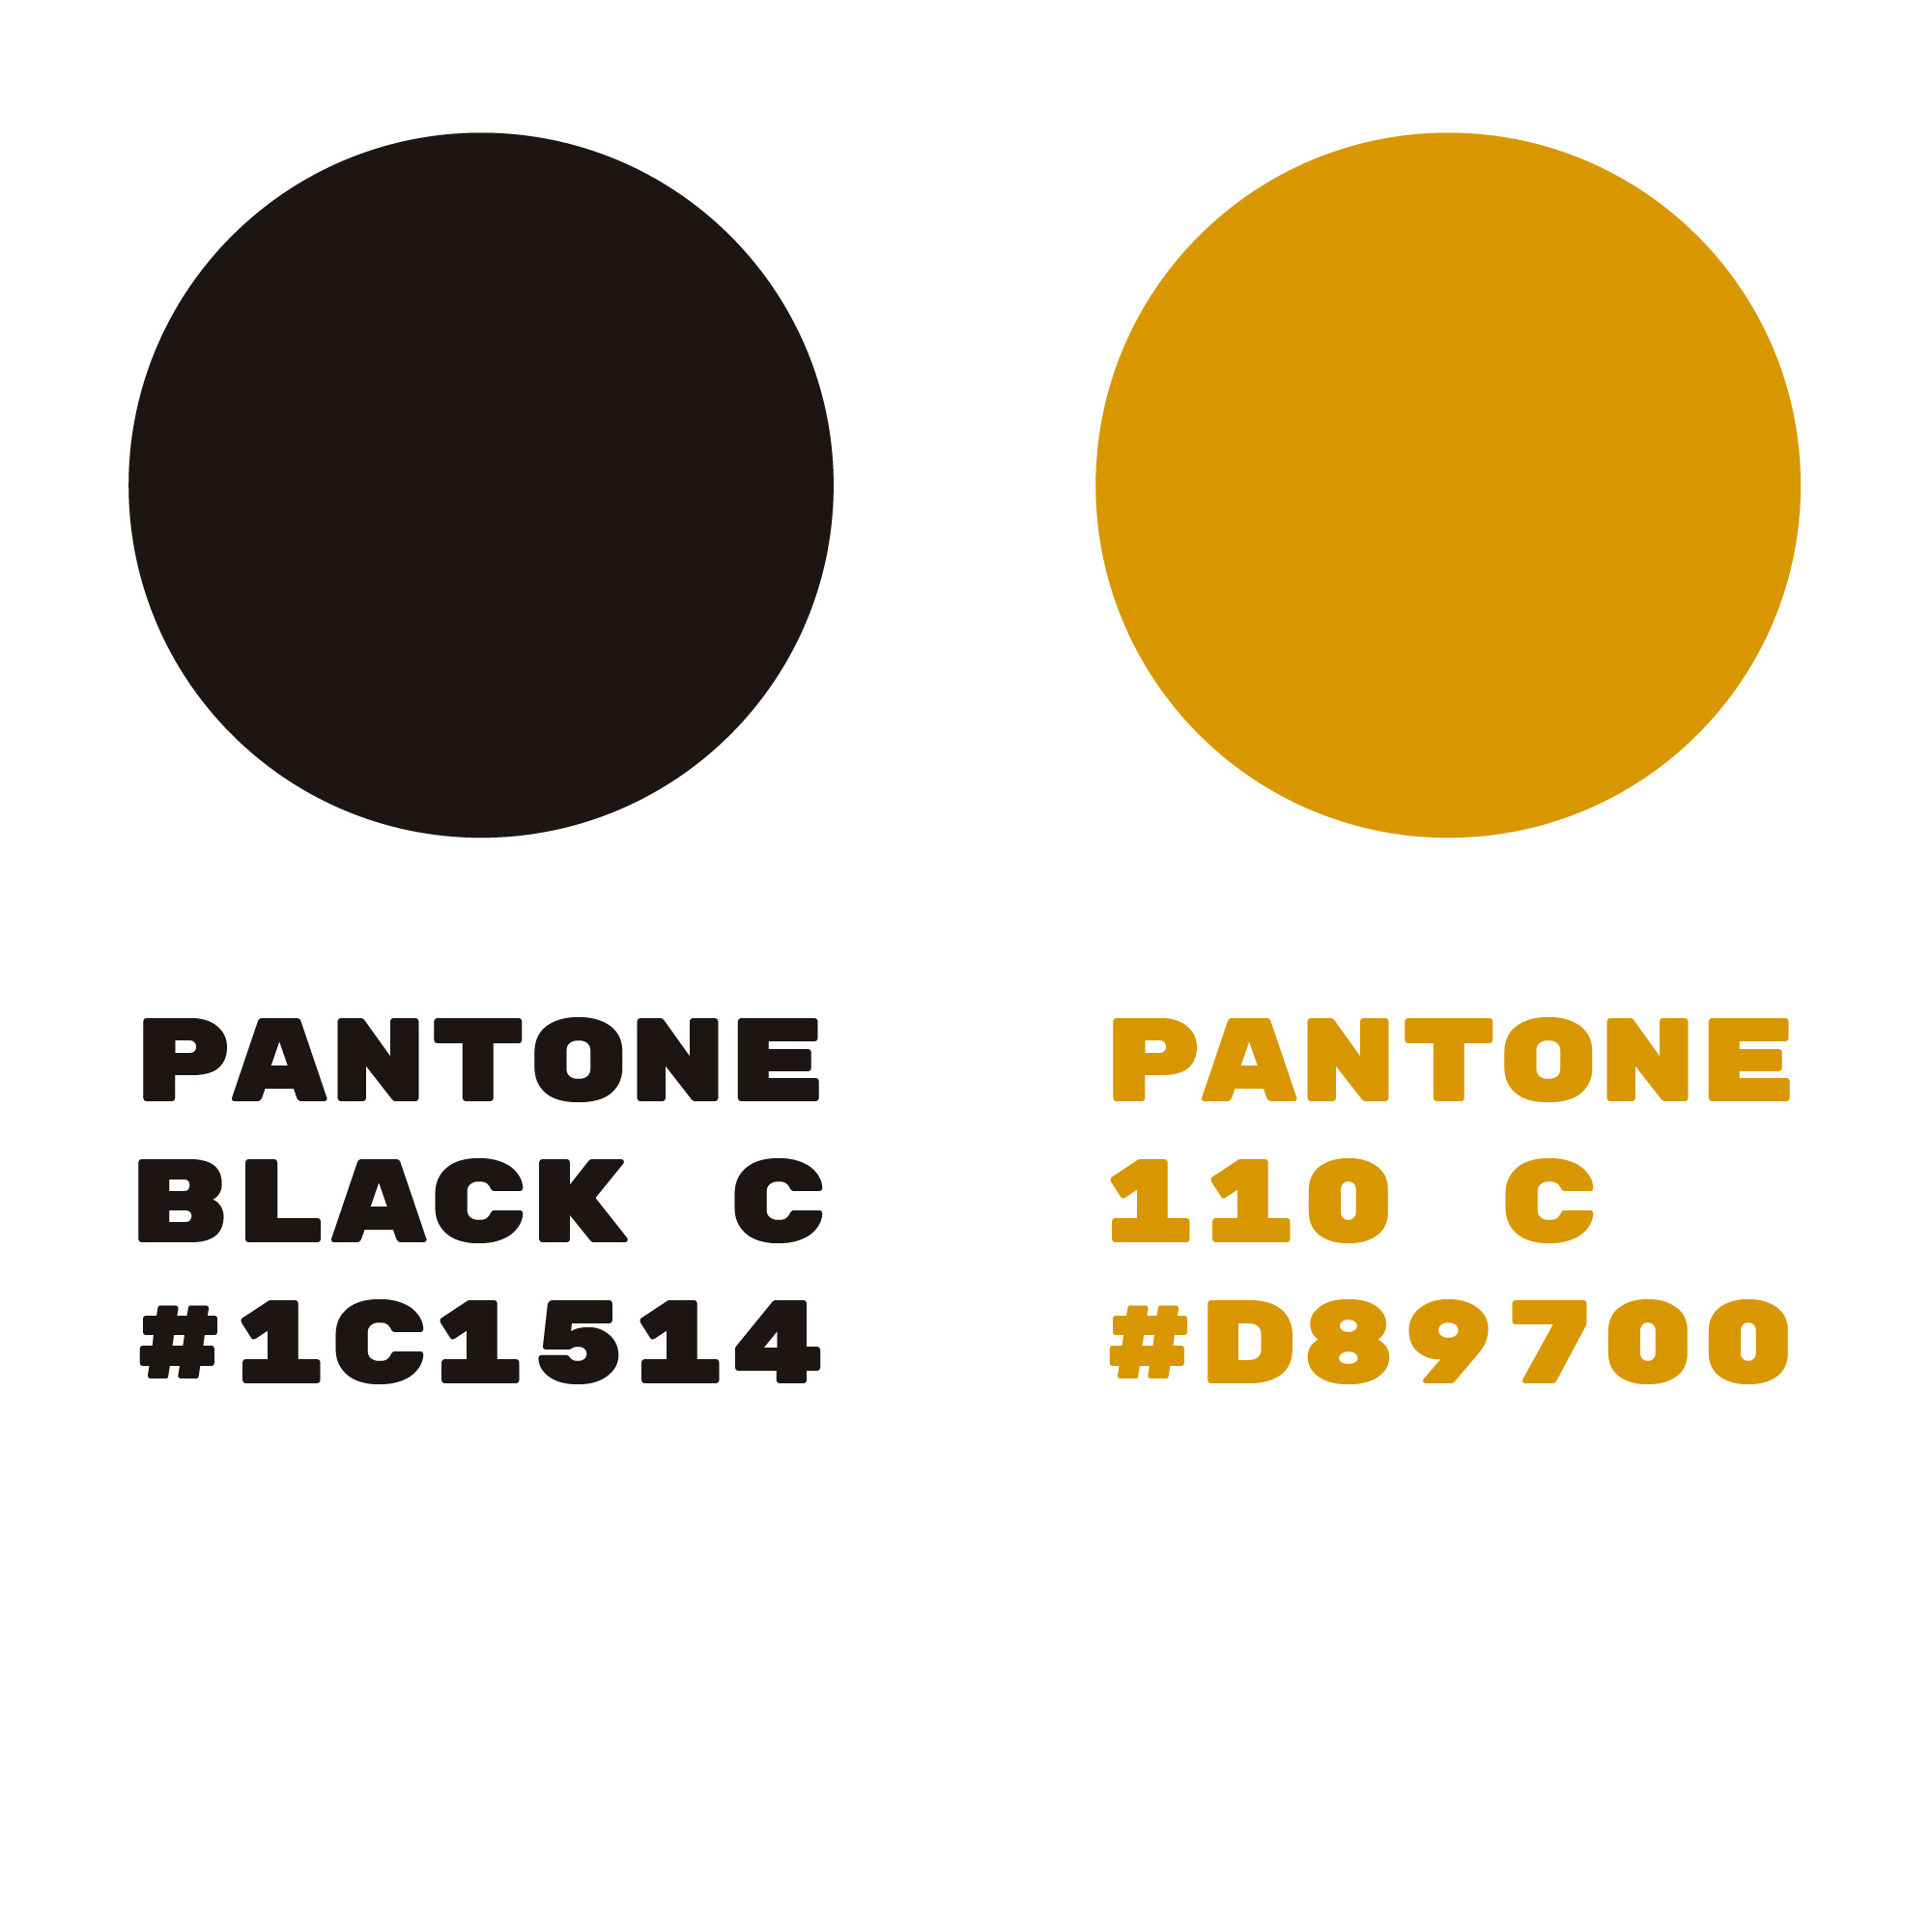 Image of the colour swatches used in the RTTR brand